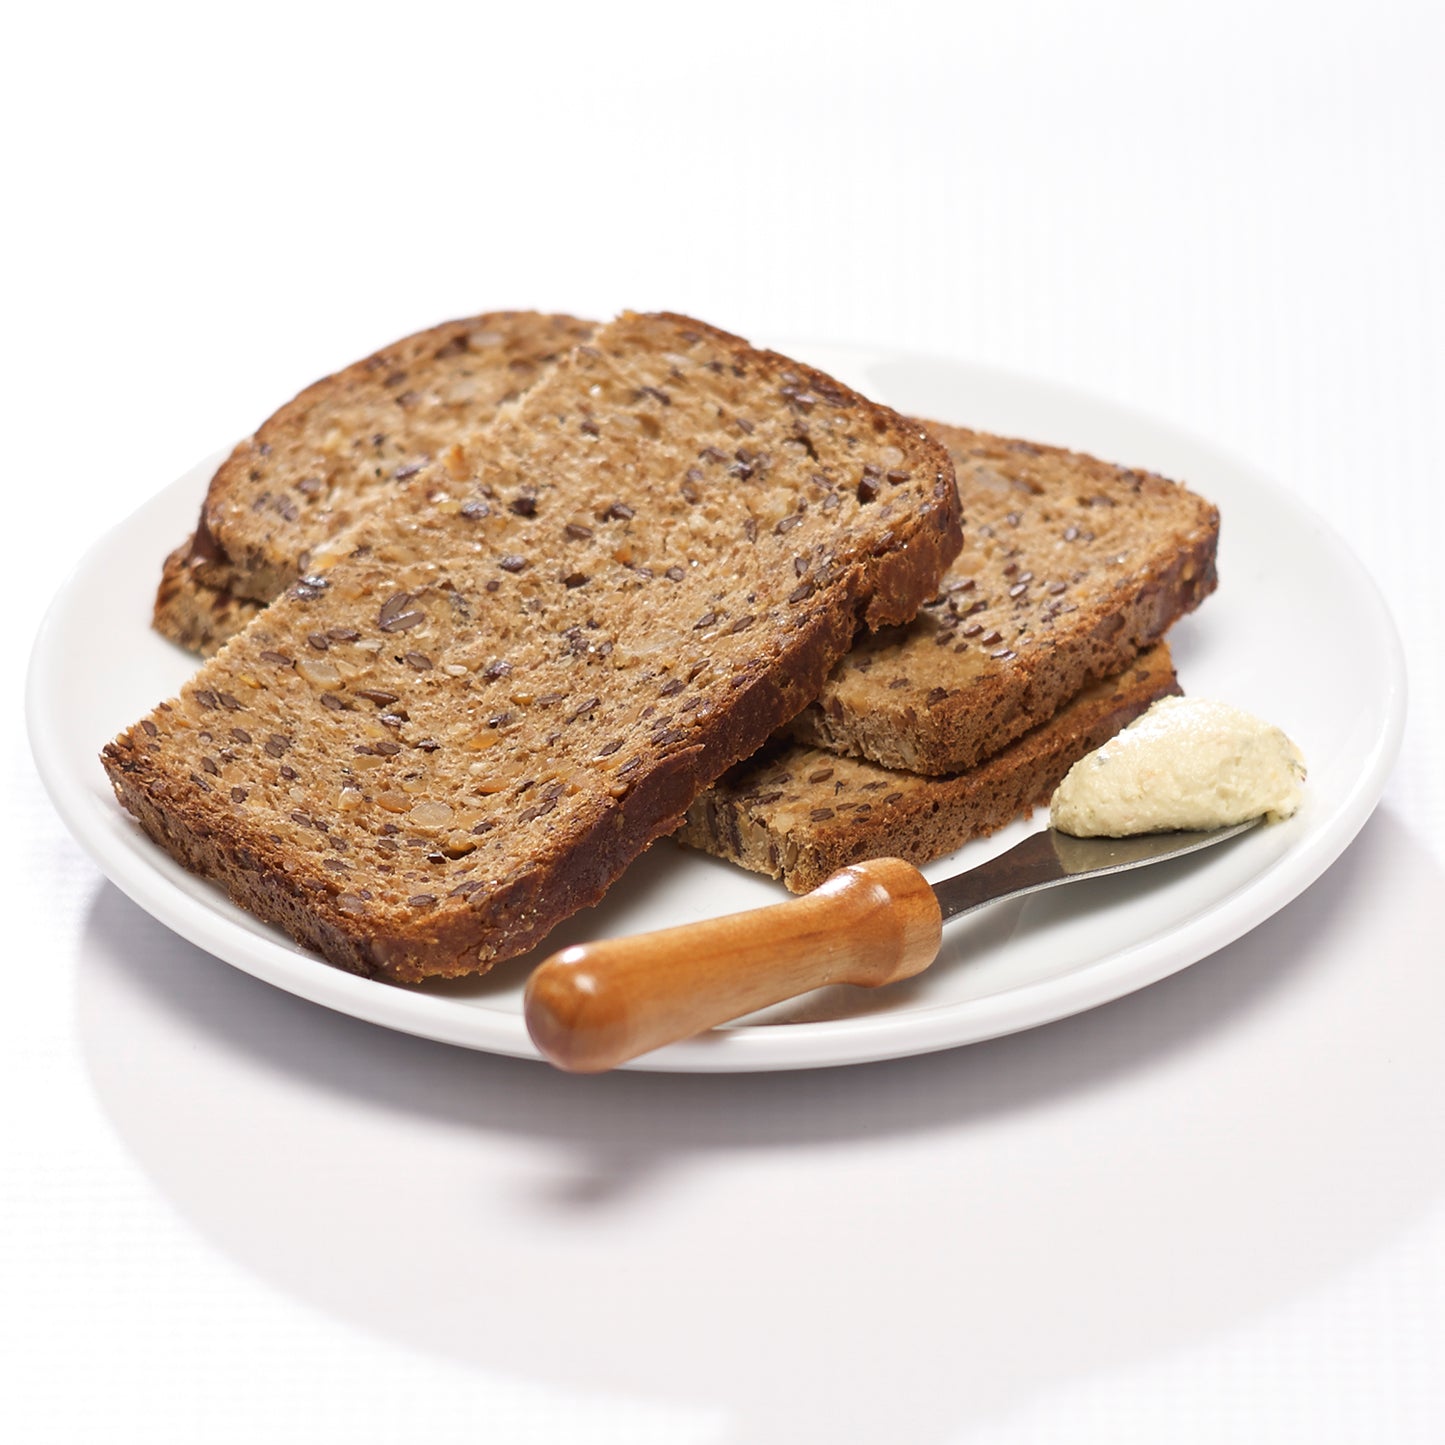 High Protein Brown Bread